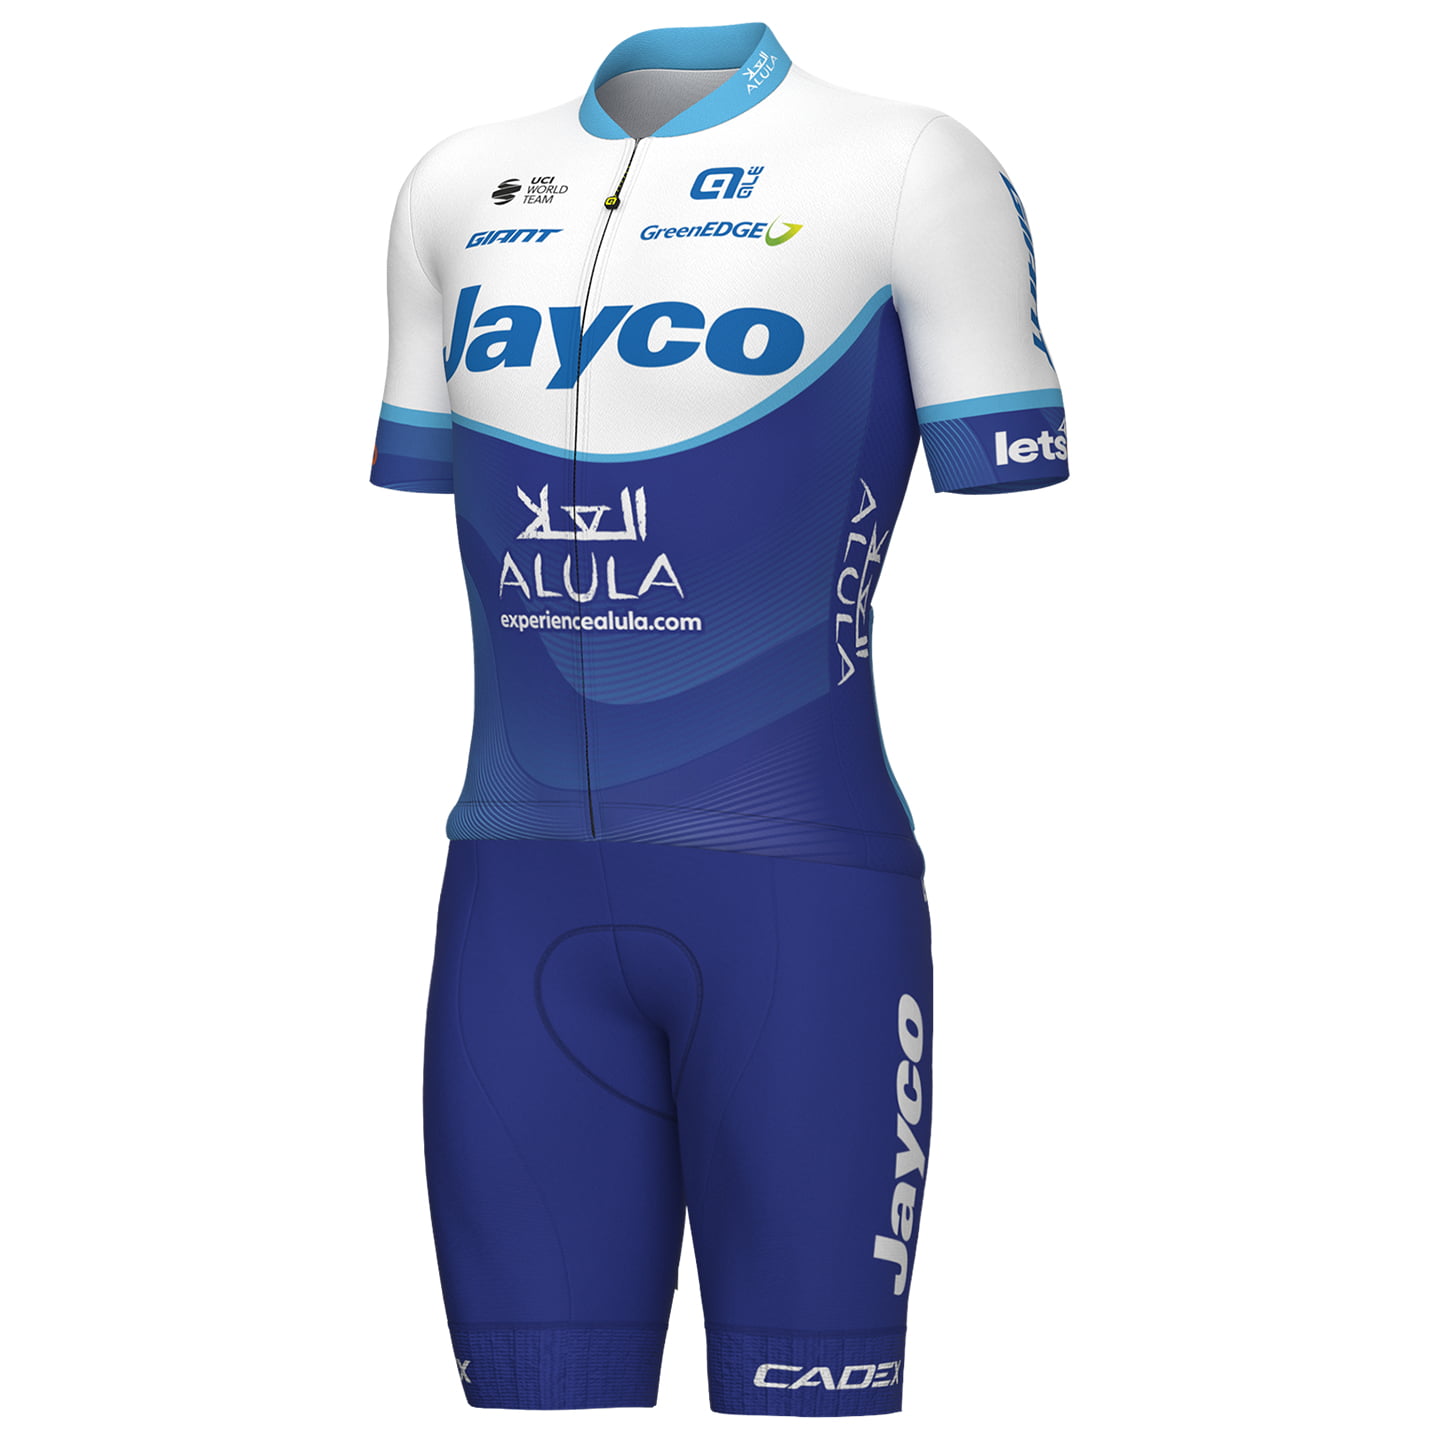 JAYCO-ALULA Prime 2023 Set (cycling jersey + cycling shorts) Set (2 pieces), for men, Cycling clothing